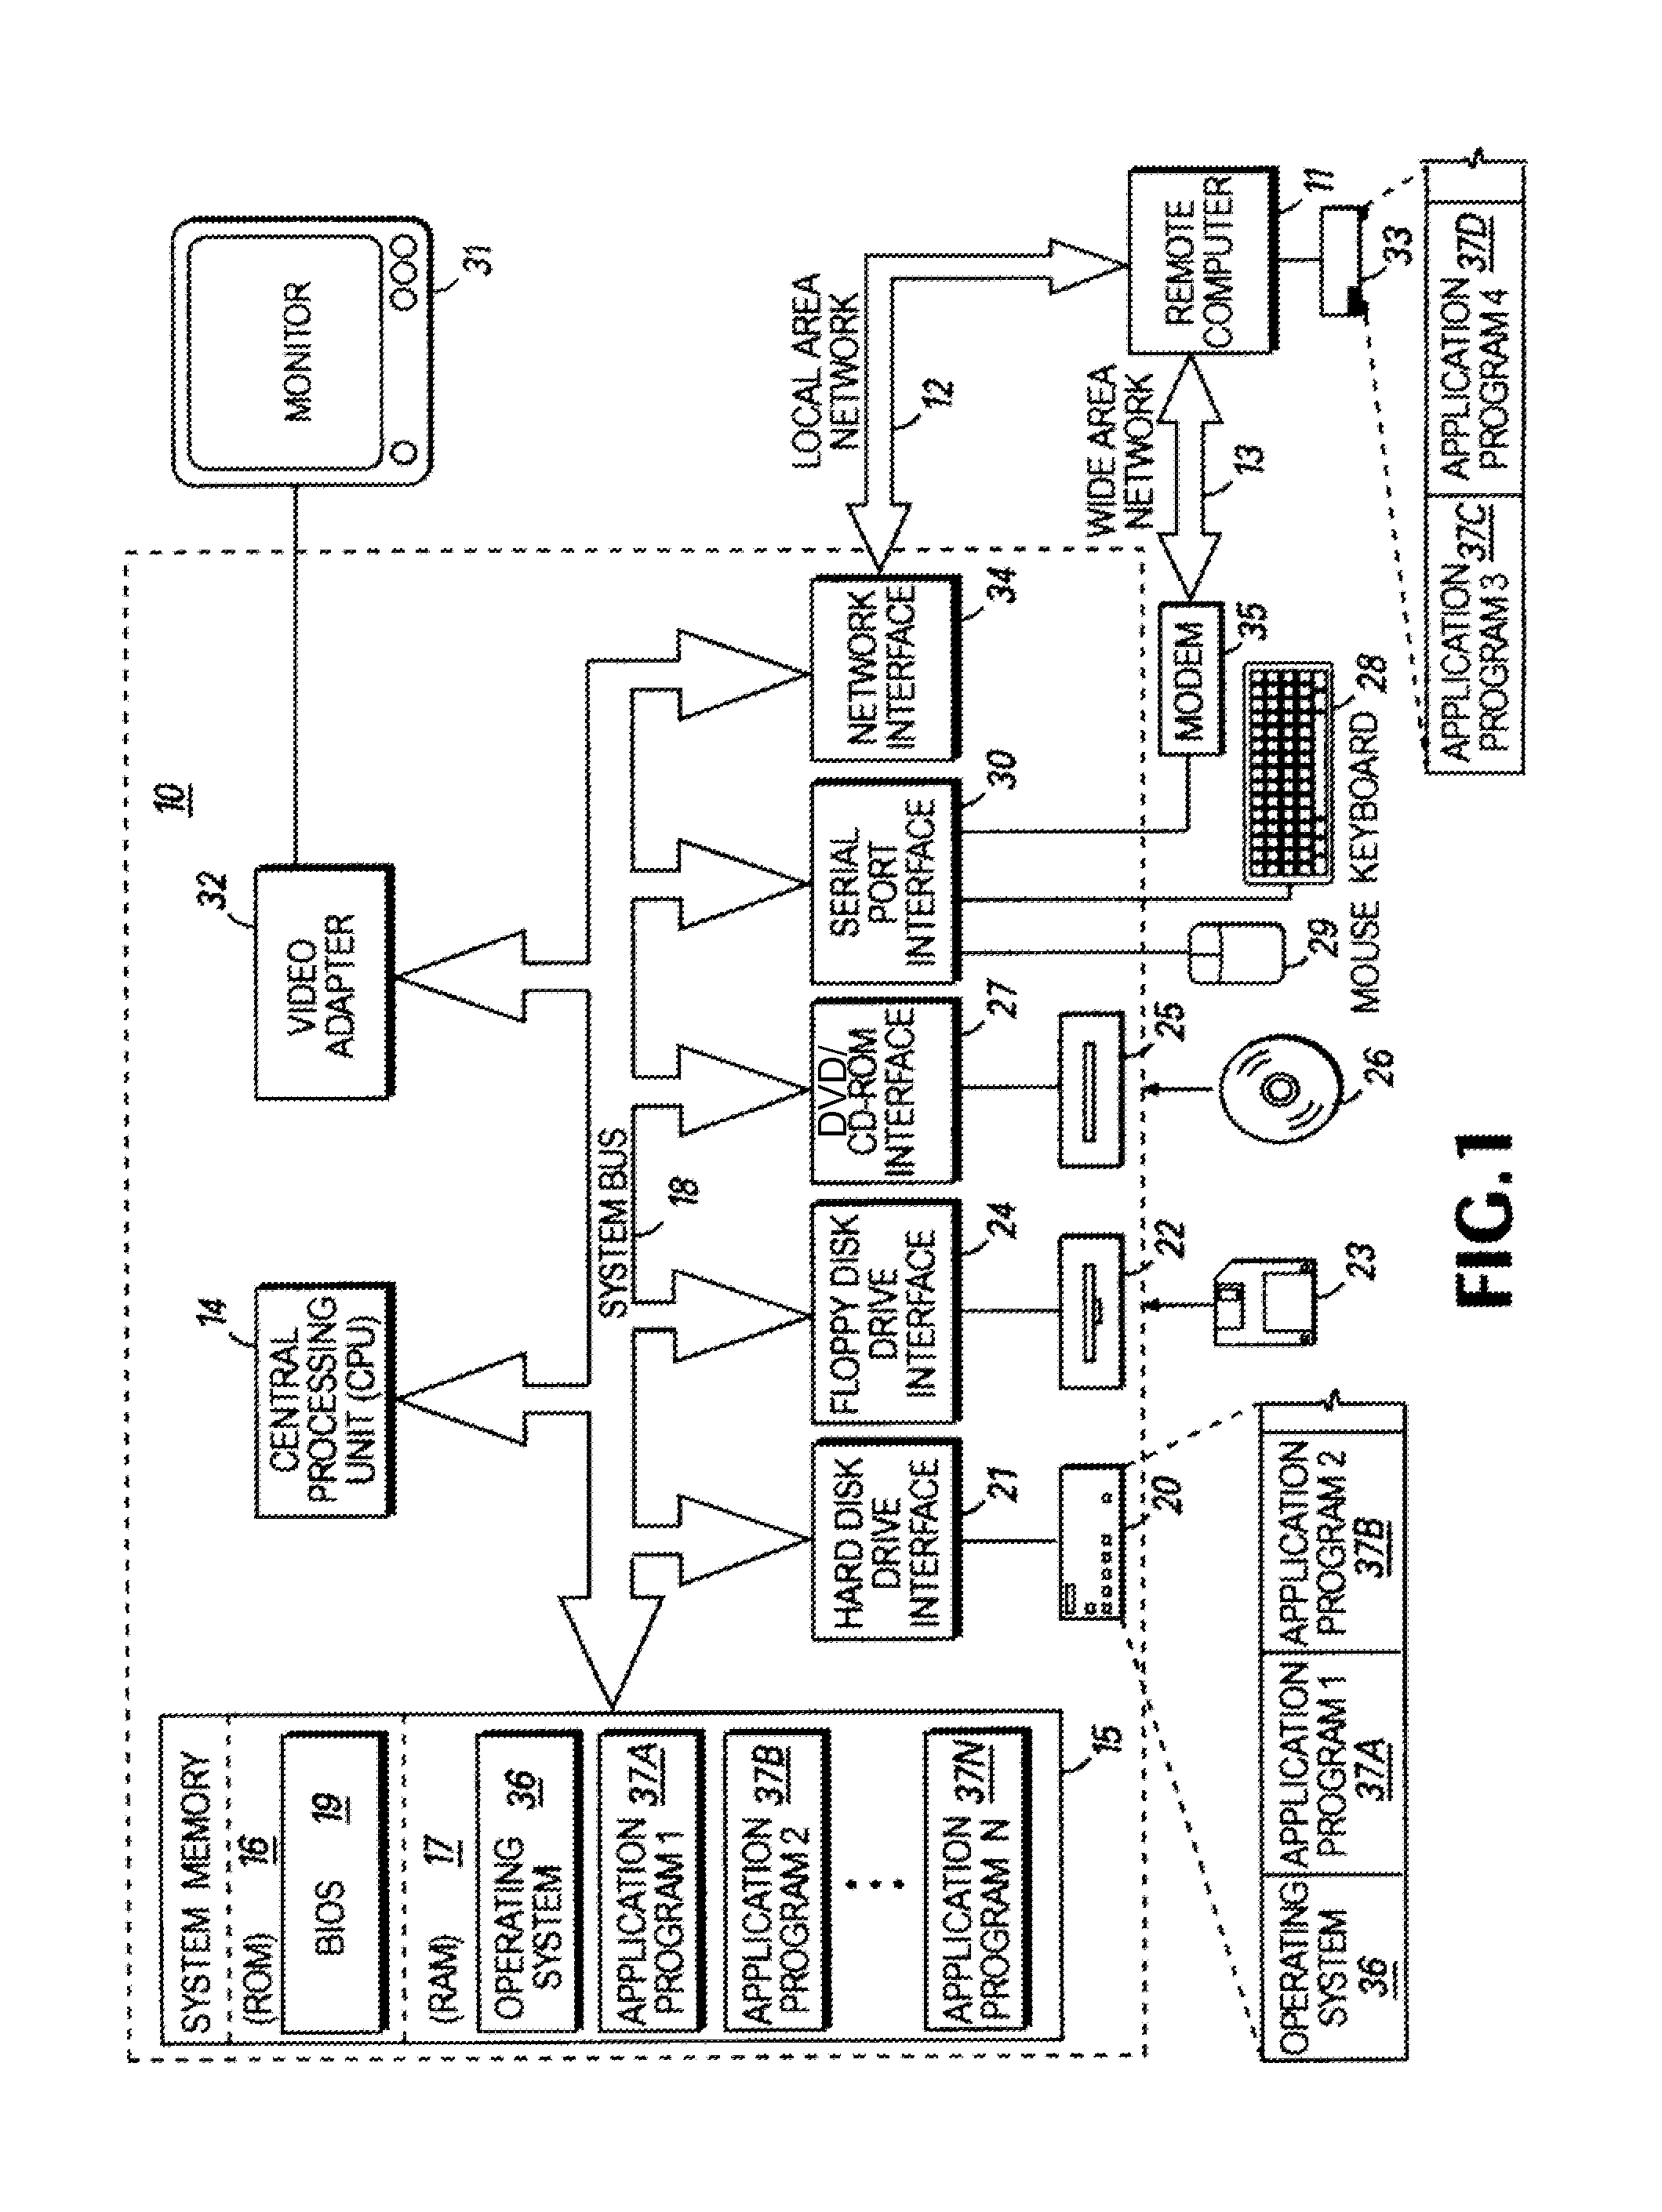 Method and system for navigating between program modules